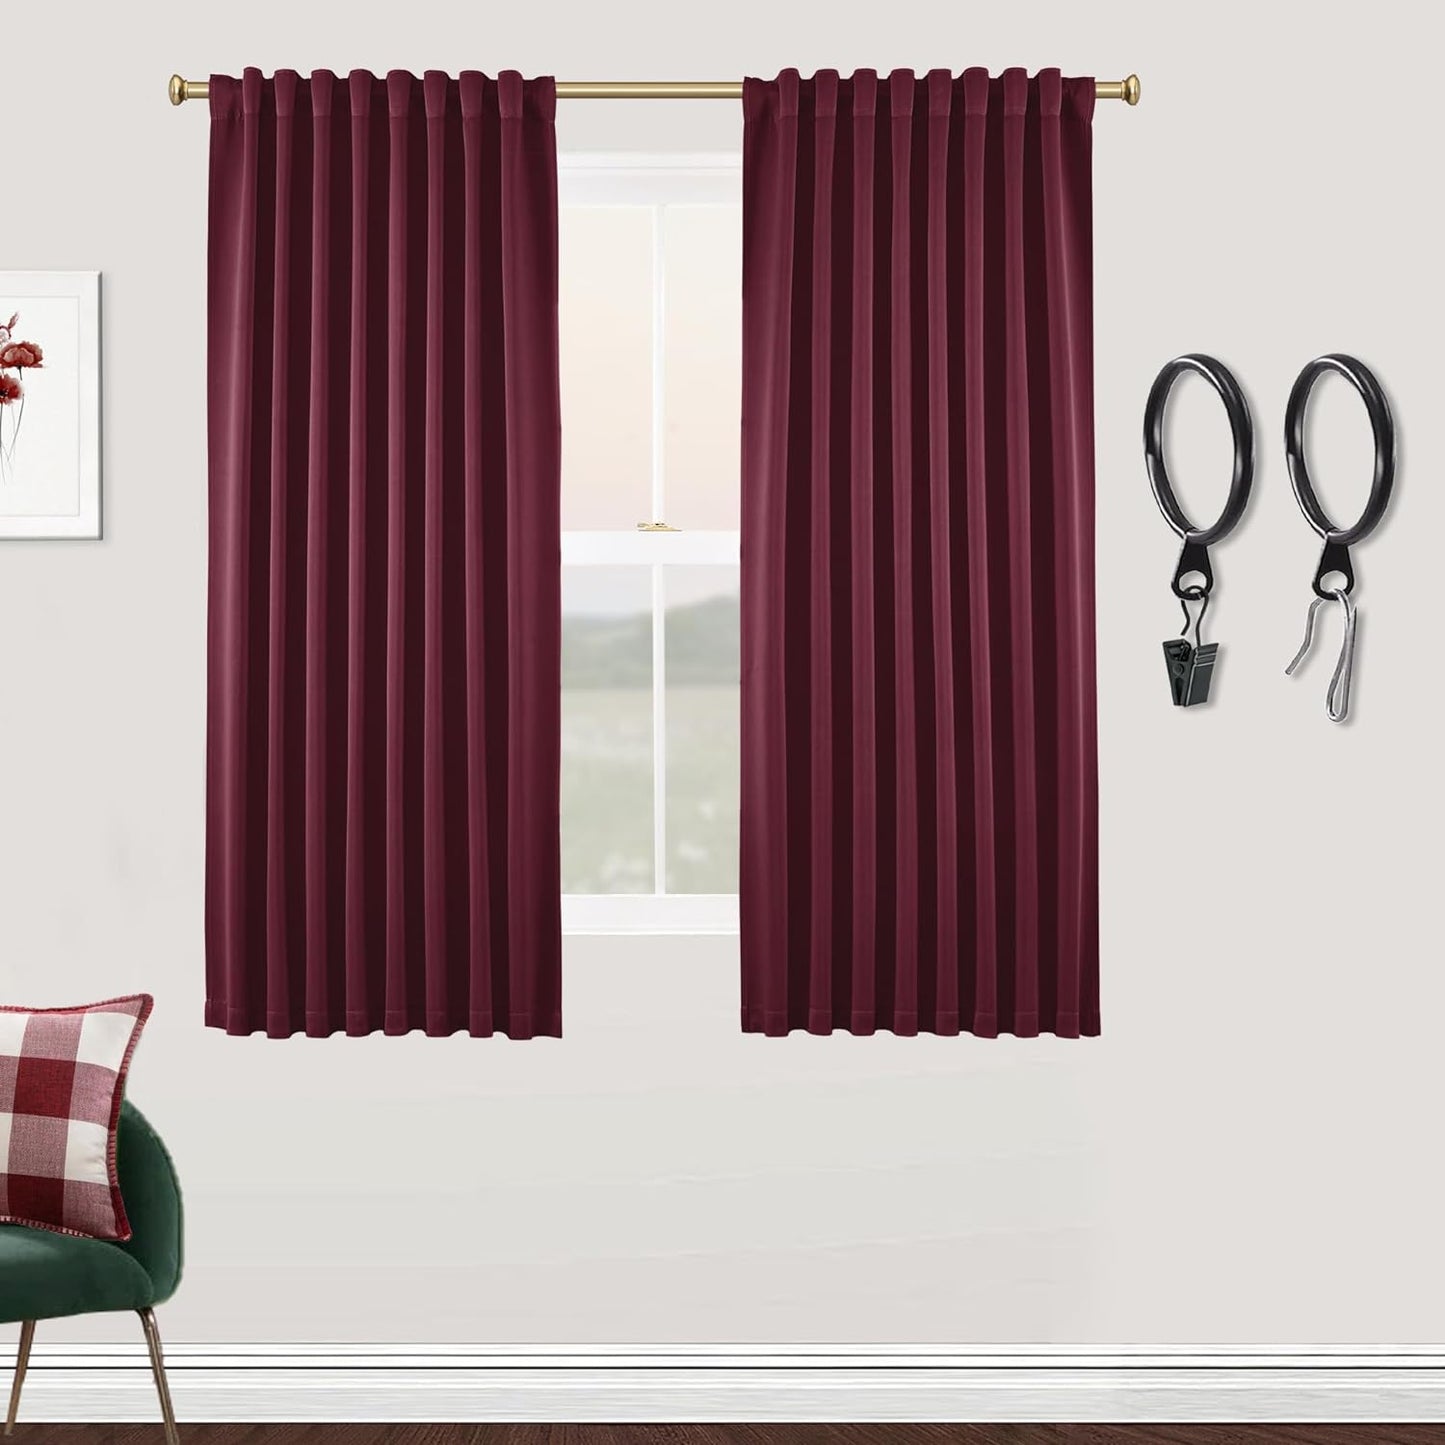 SHINELAND Beige Room Darkening Curtains 105 Inches Long for Living Room Bedroom,Cortinas Para Cuarto Bloqueador De Luz,Thermal Insulated Back Tab Pleat Blackout Curtains for Sunroom Patio Door Indoor  SHINELAND Burgundy Red 2X(52"Wx63"L) 